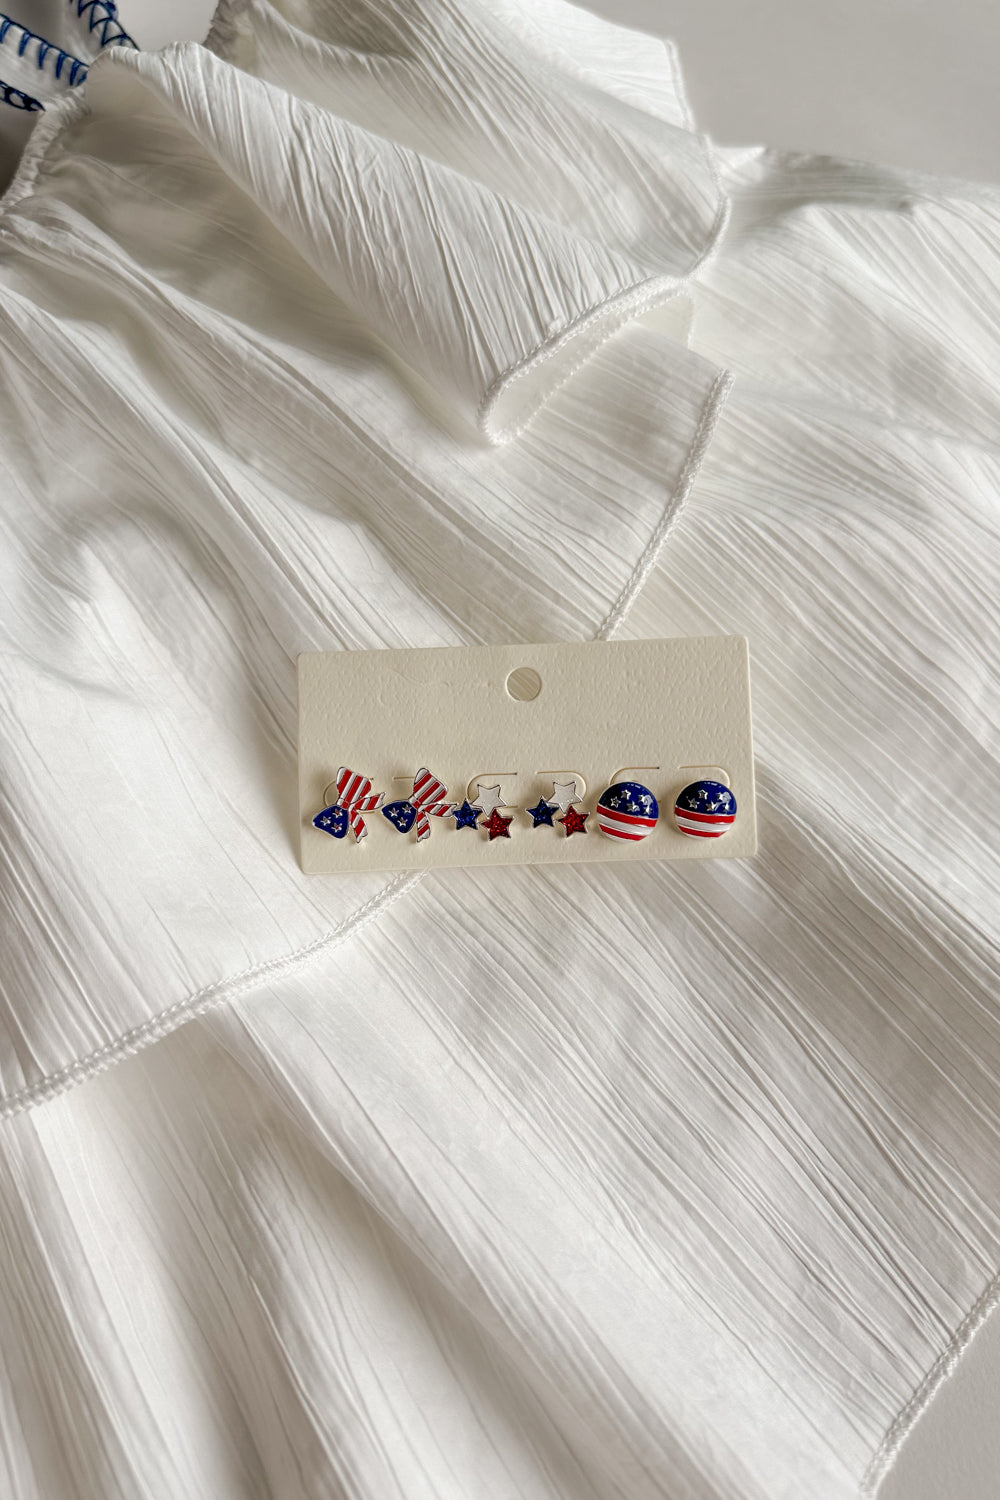 Image shows Kennedy Stars & Stripes Stud Set that have 3 pairs or studs; bows, circles, and stars. Studs are red white and blue with stripe details.